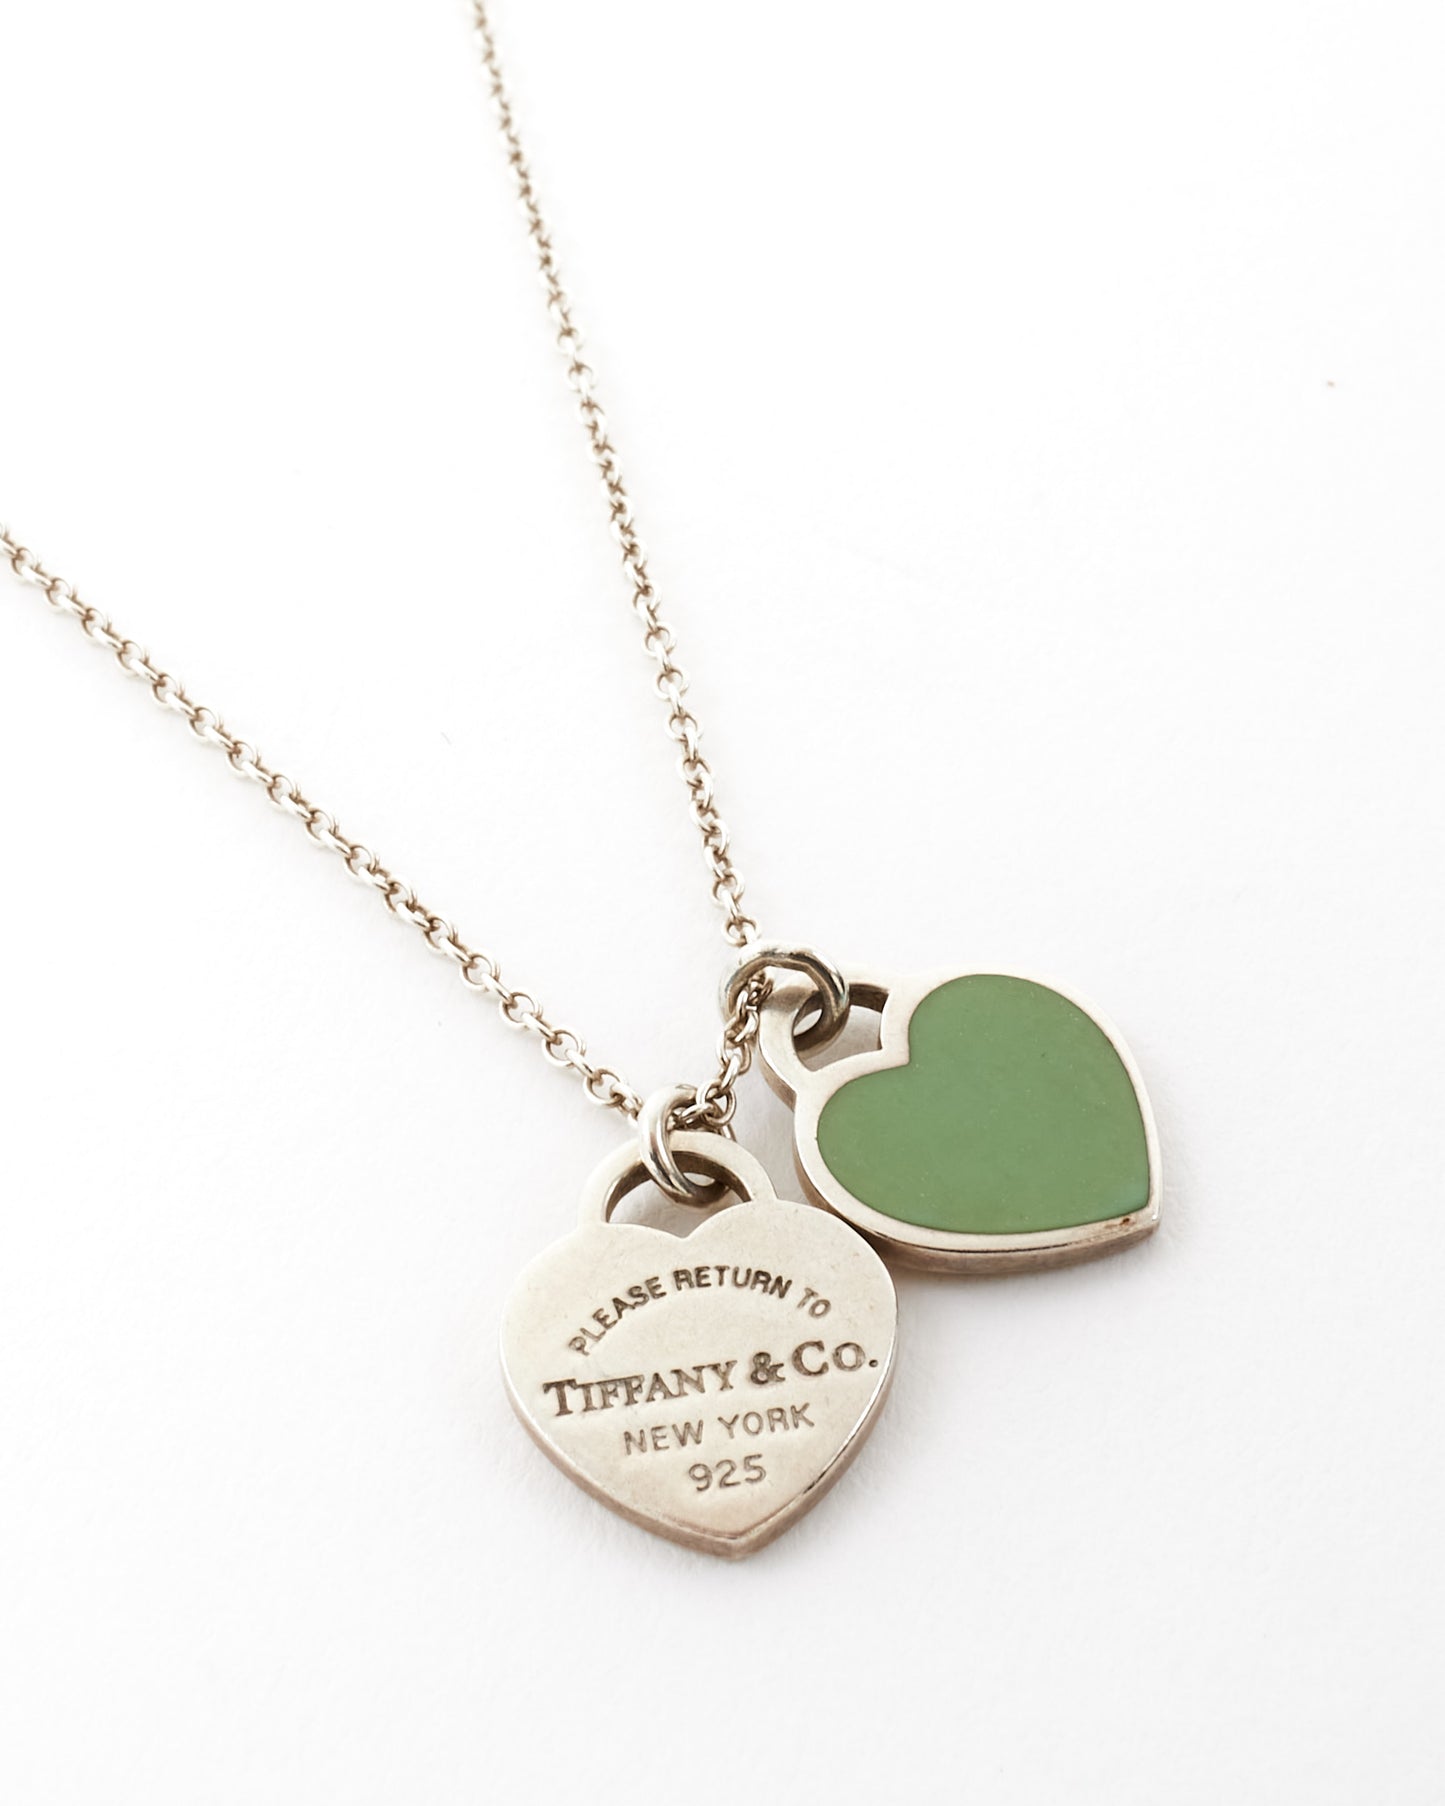 Tiffany & Co. Silver Double Heart Tag Pendant Necklace